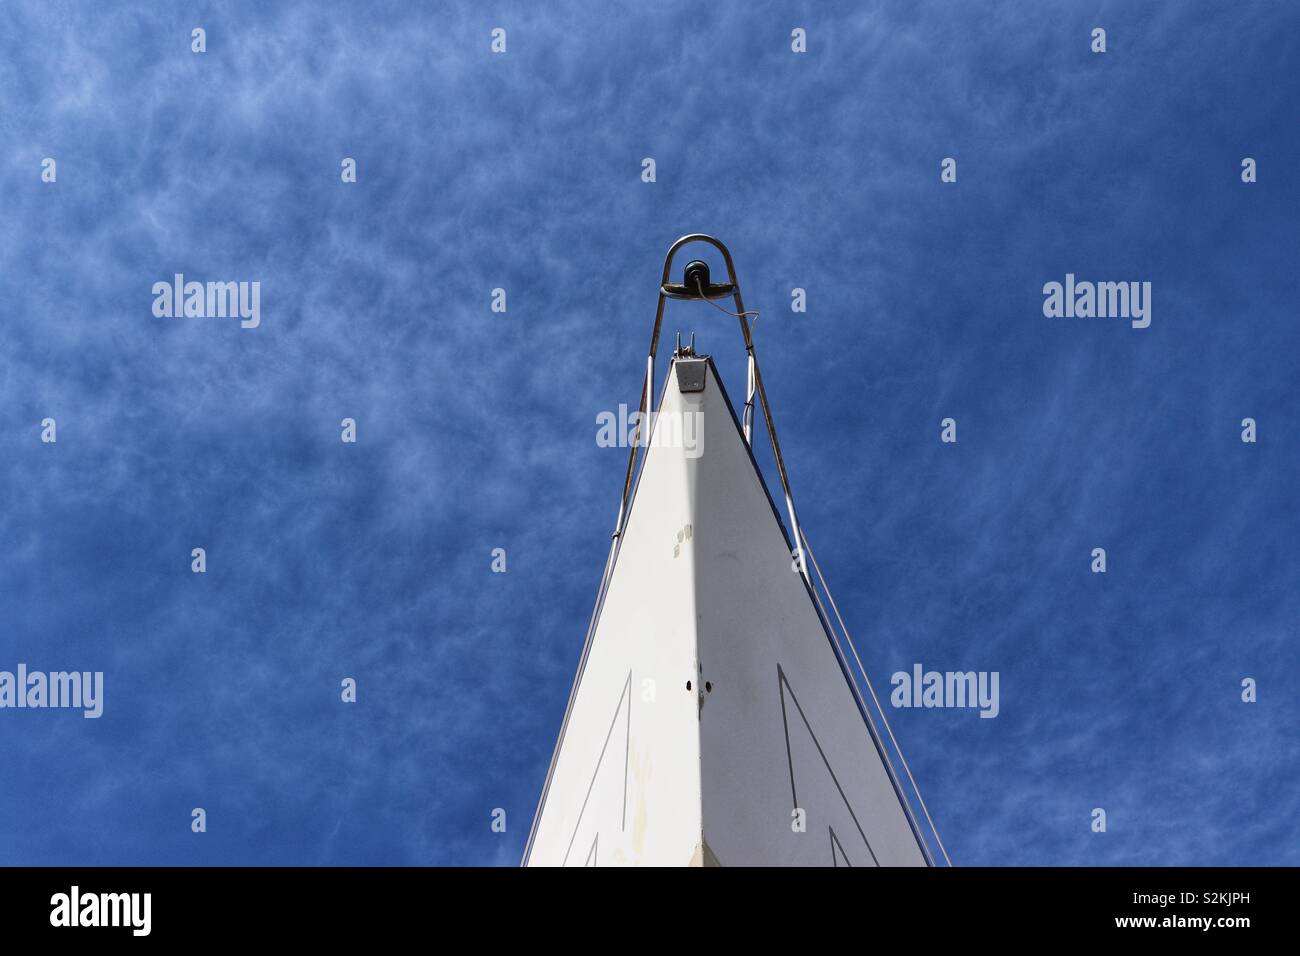 Abstract view of ships bow with blue skies Stock Photo